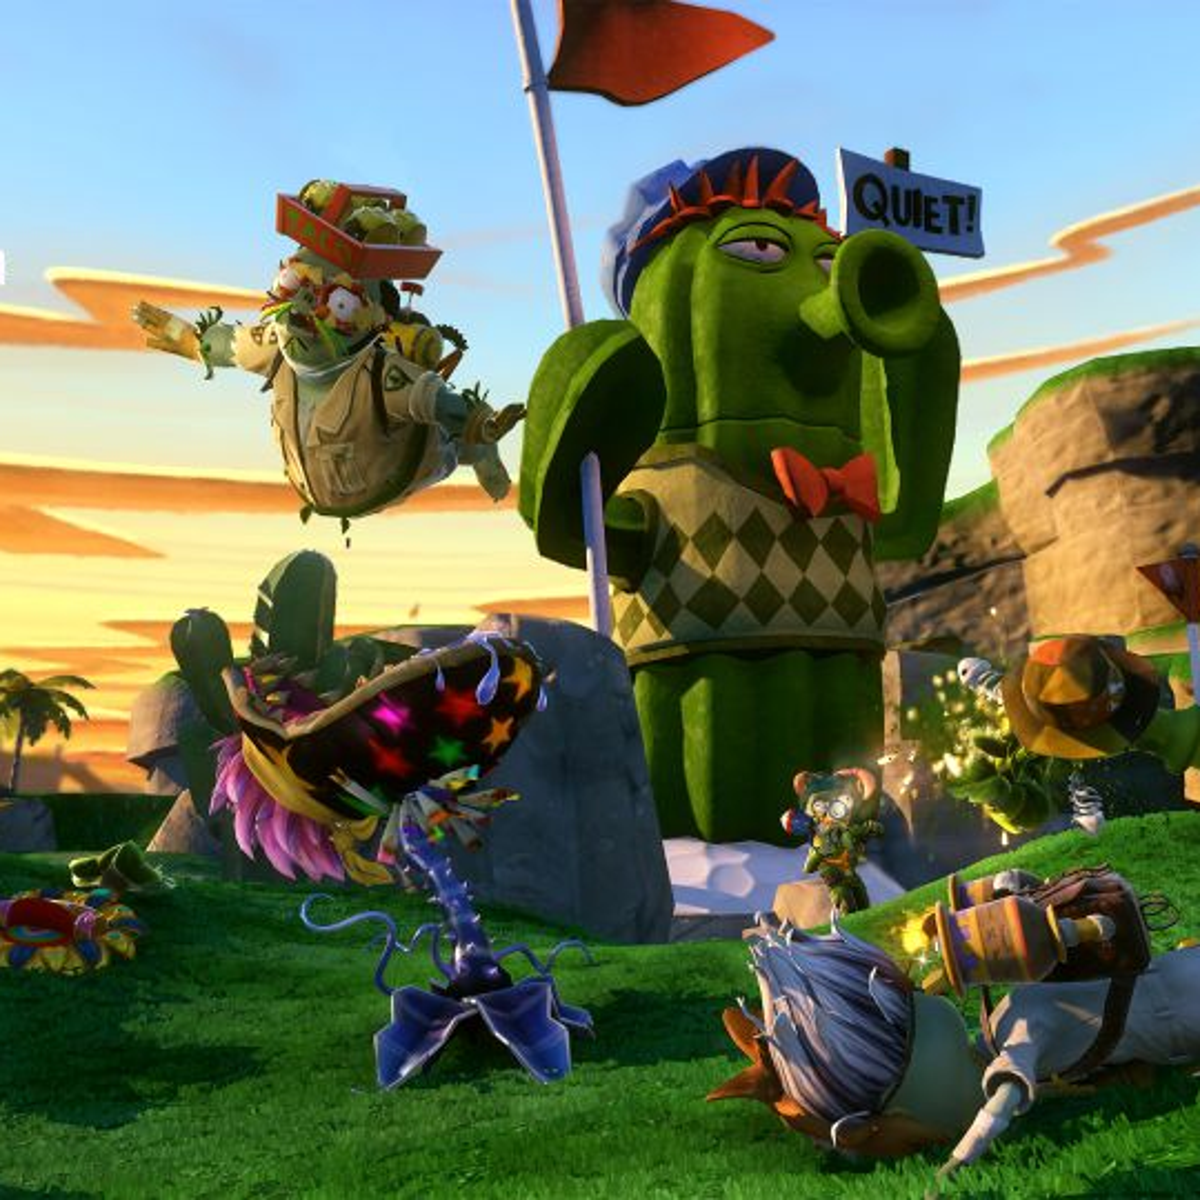 Plants vs Zombies 2 officially arrives on Android, but not through